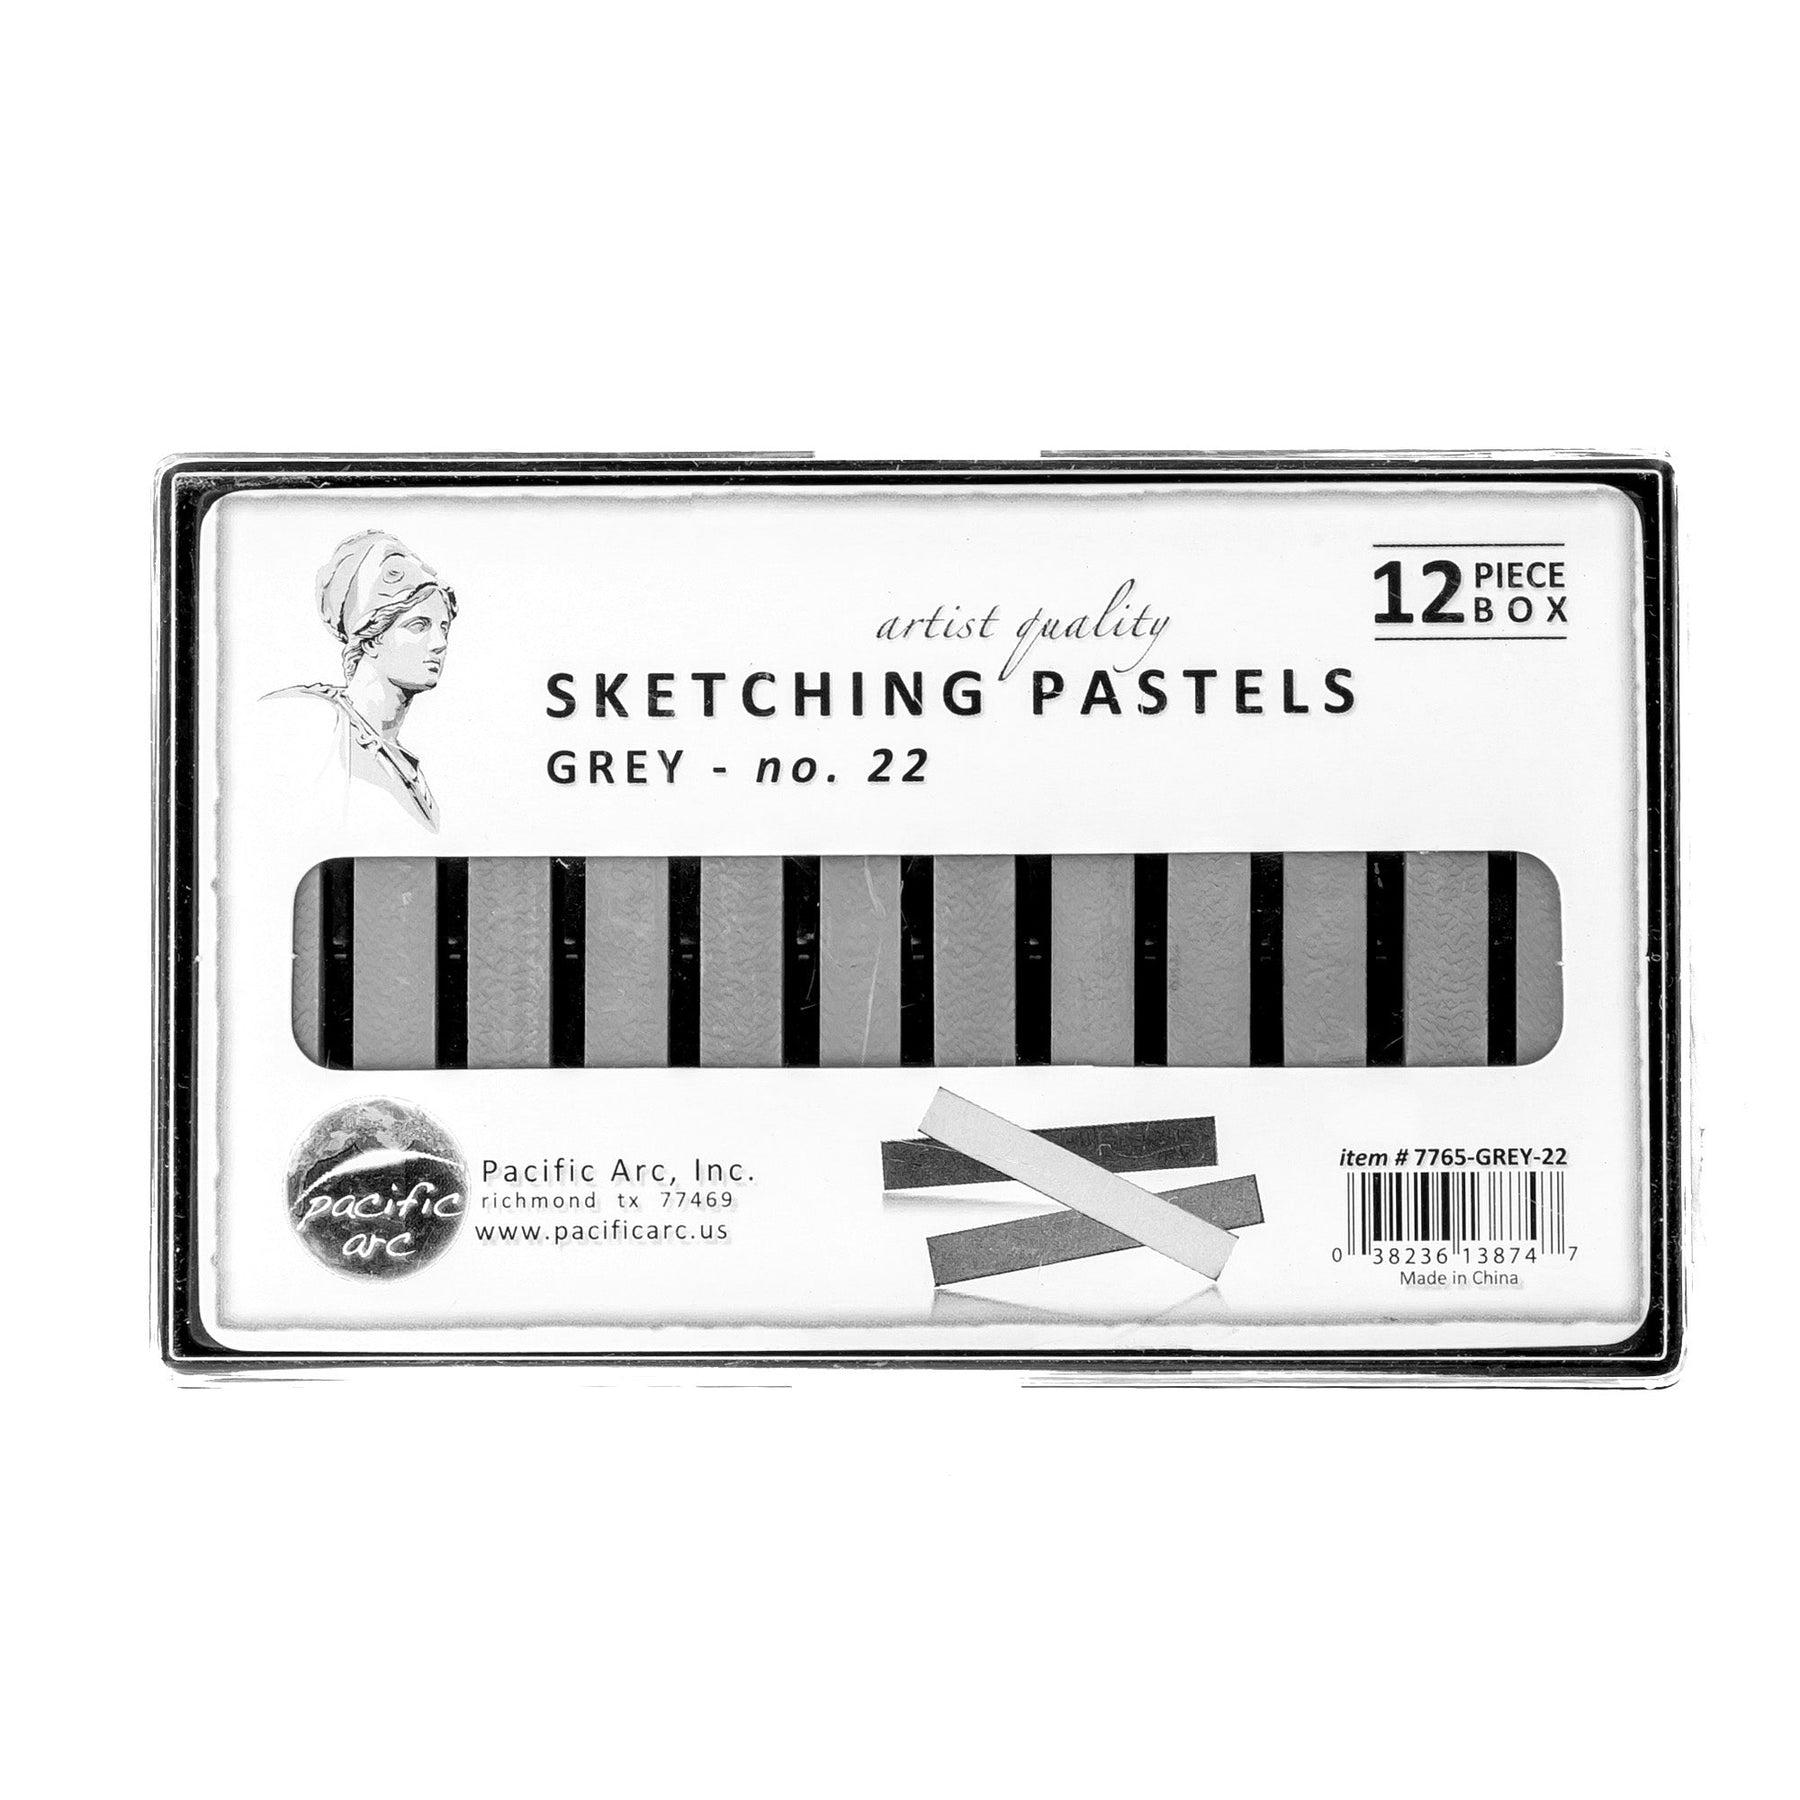 Pacific Arc - Sketching Pastel Set, 3-piece - Semi-Soft - White- For Sketching, Blending, Lighten and Drawing - Non-Toxic